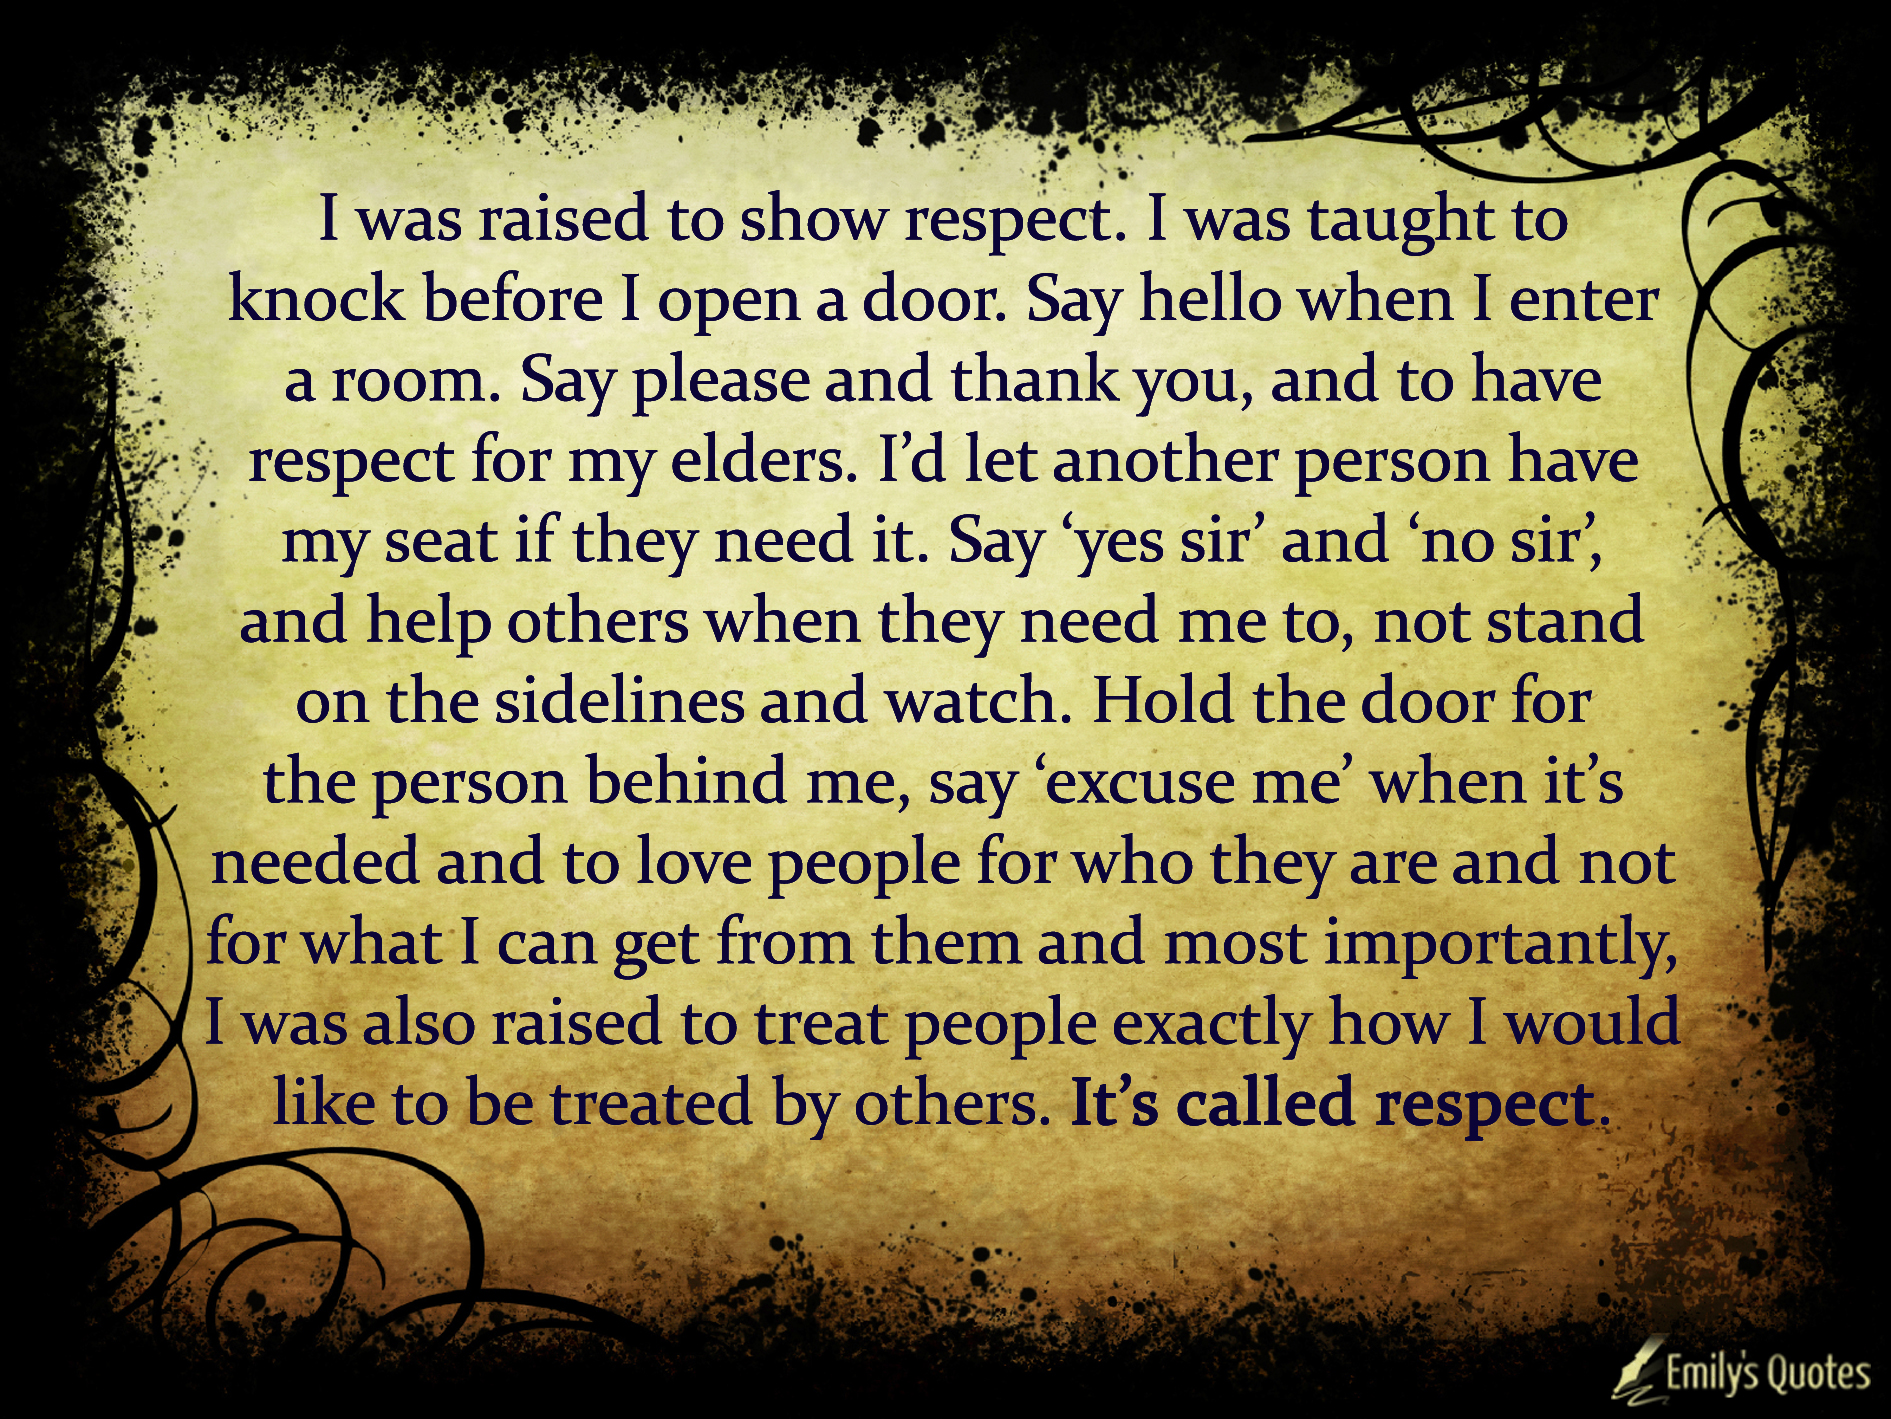 I was raised to show respect. I was taught to knock before I open a door